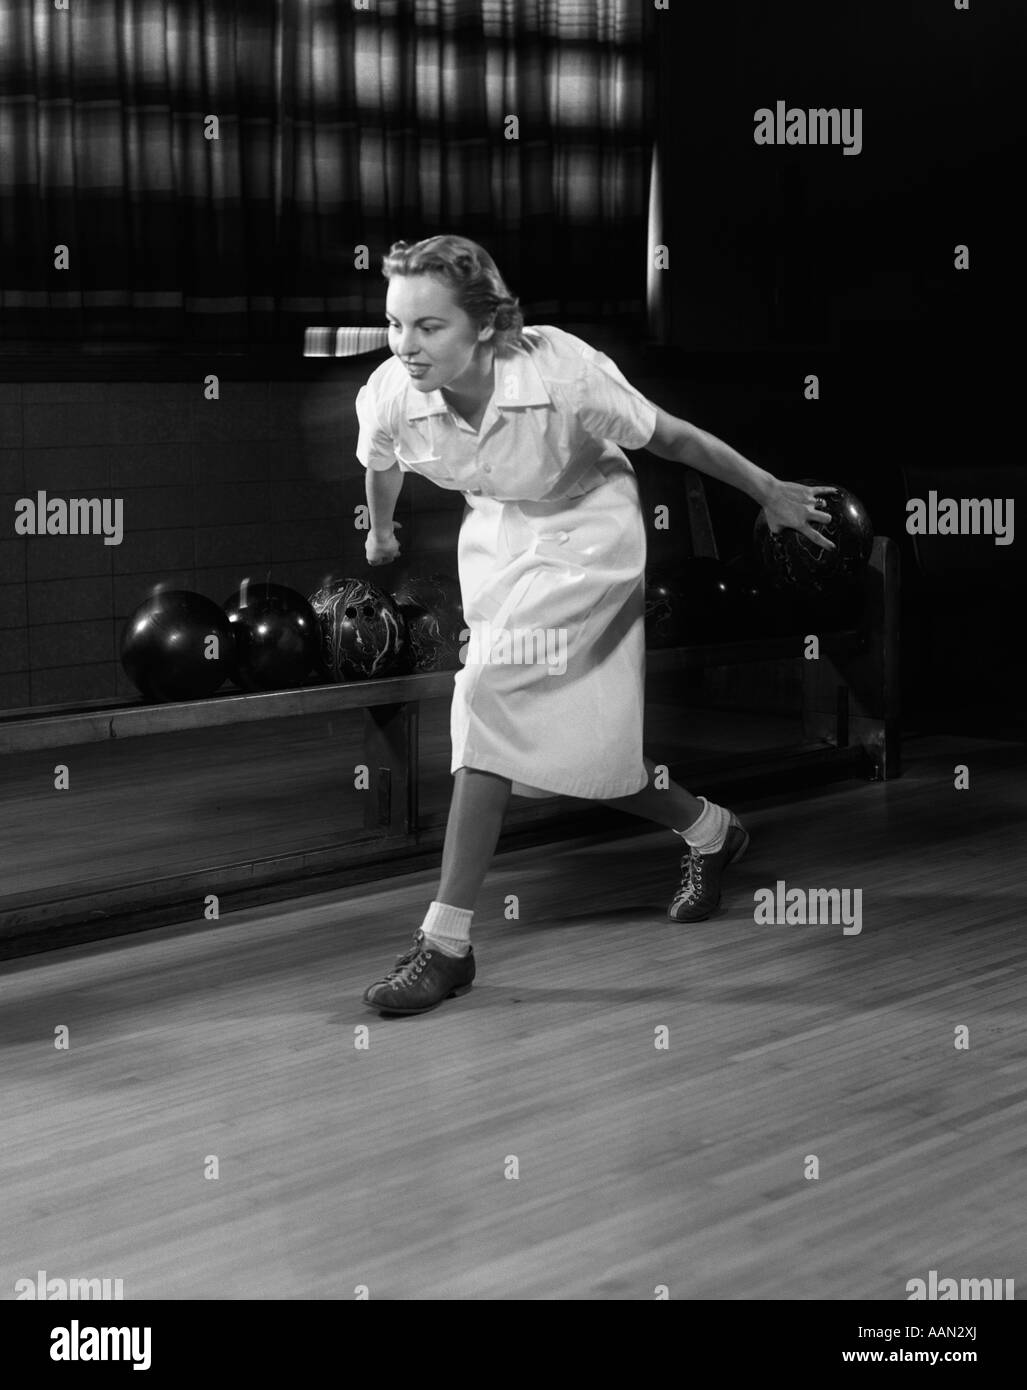 1950s WOMAN BOWLING ABOUT TO RELEASE BOWLING BALL DOWN ALLEY Stock Photo